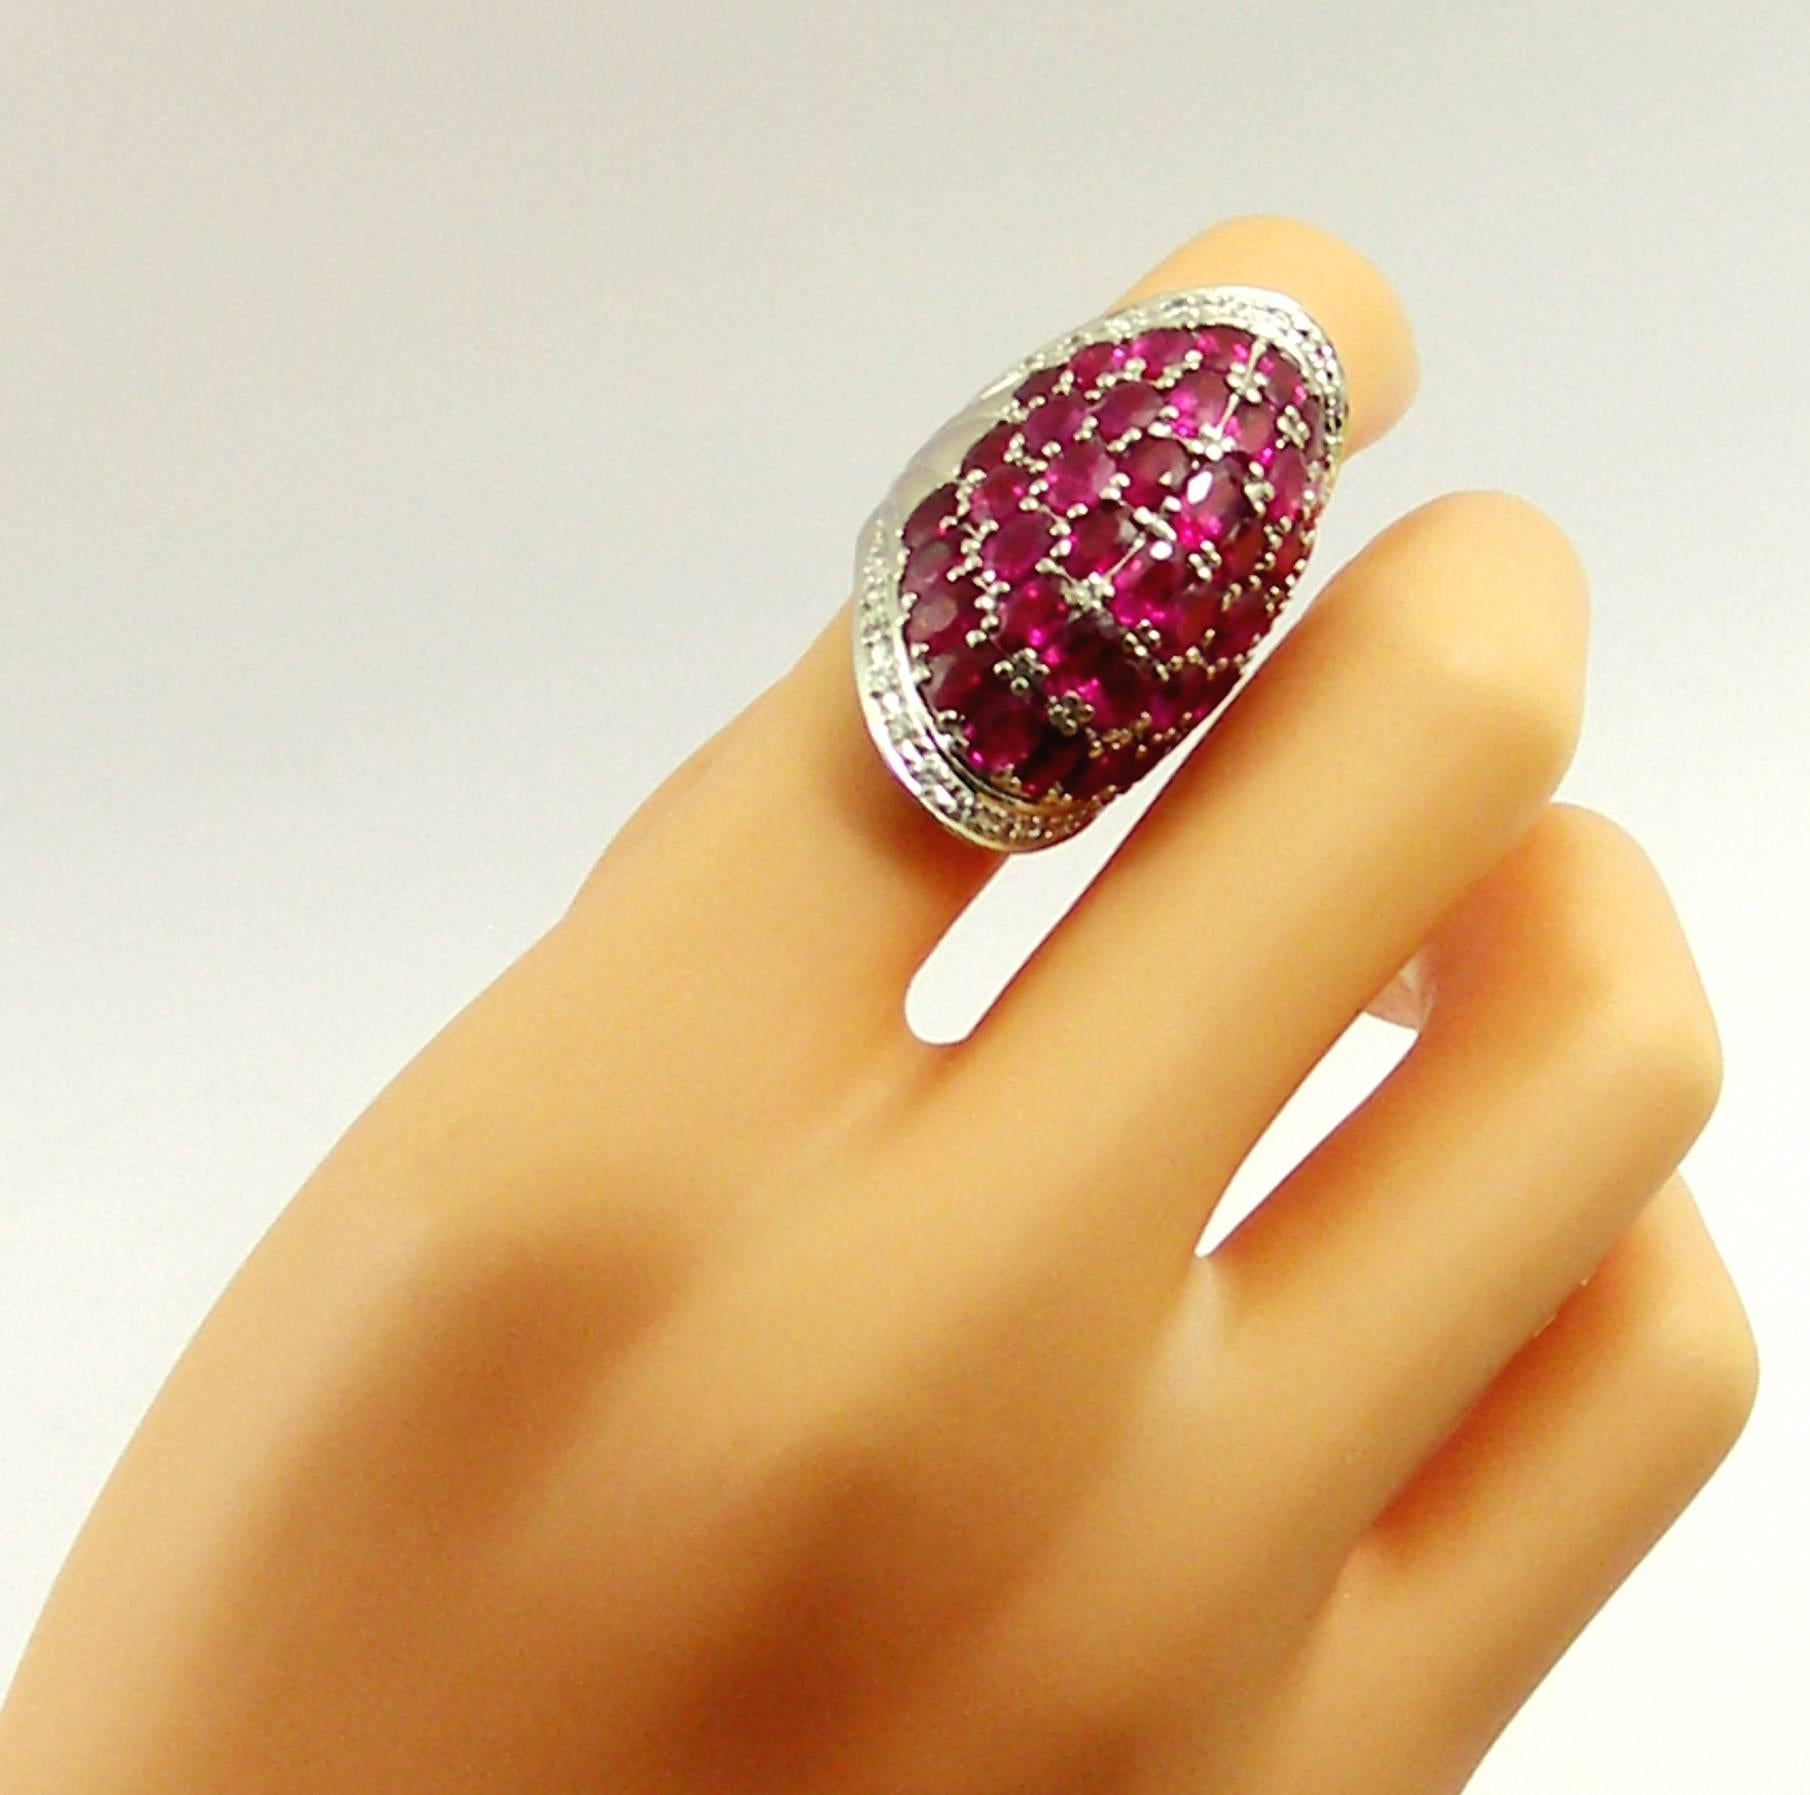 Women's Platinum Cocktail Ring with Diamonds and Rubies